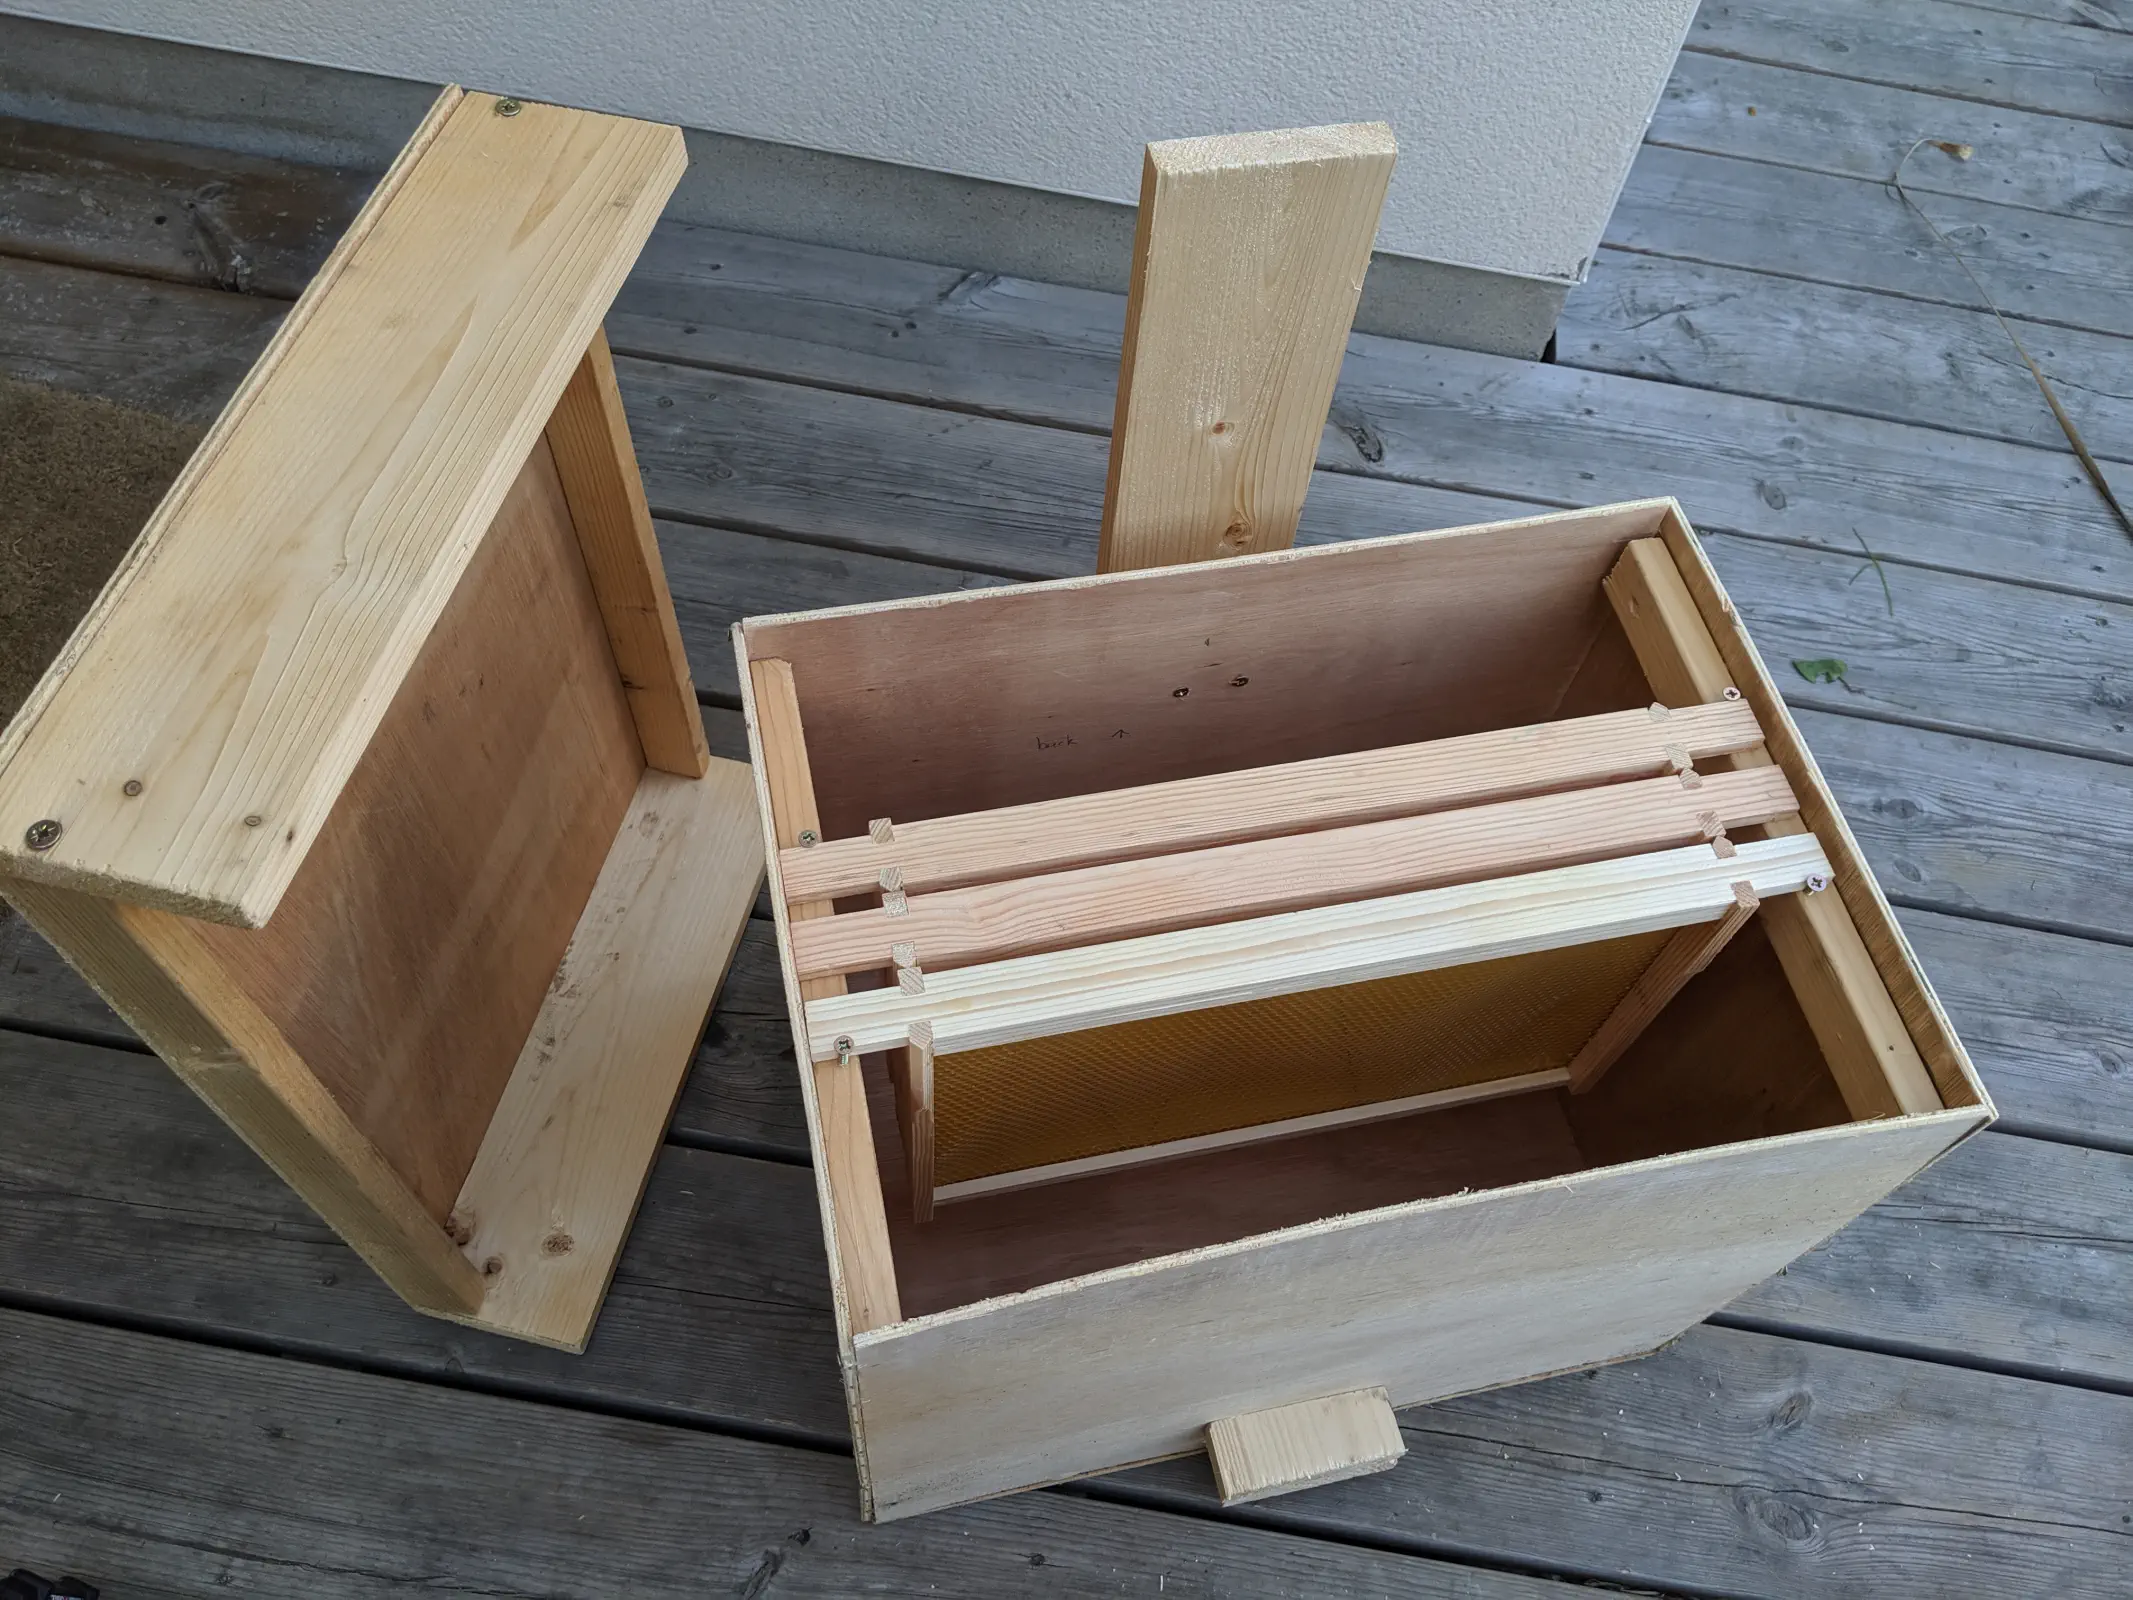 A honeybee bait box with a few empty frames inside and an opened lid leaning on the side